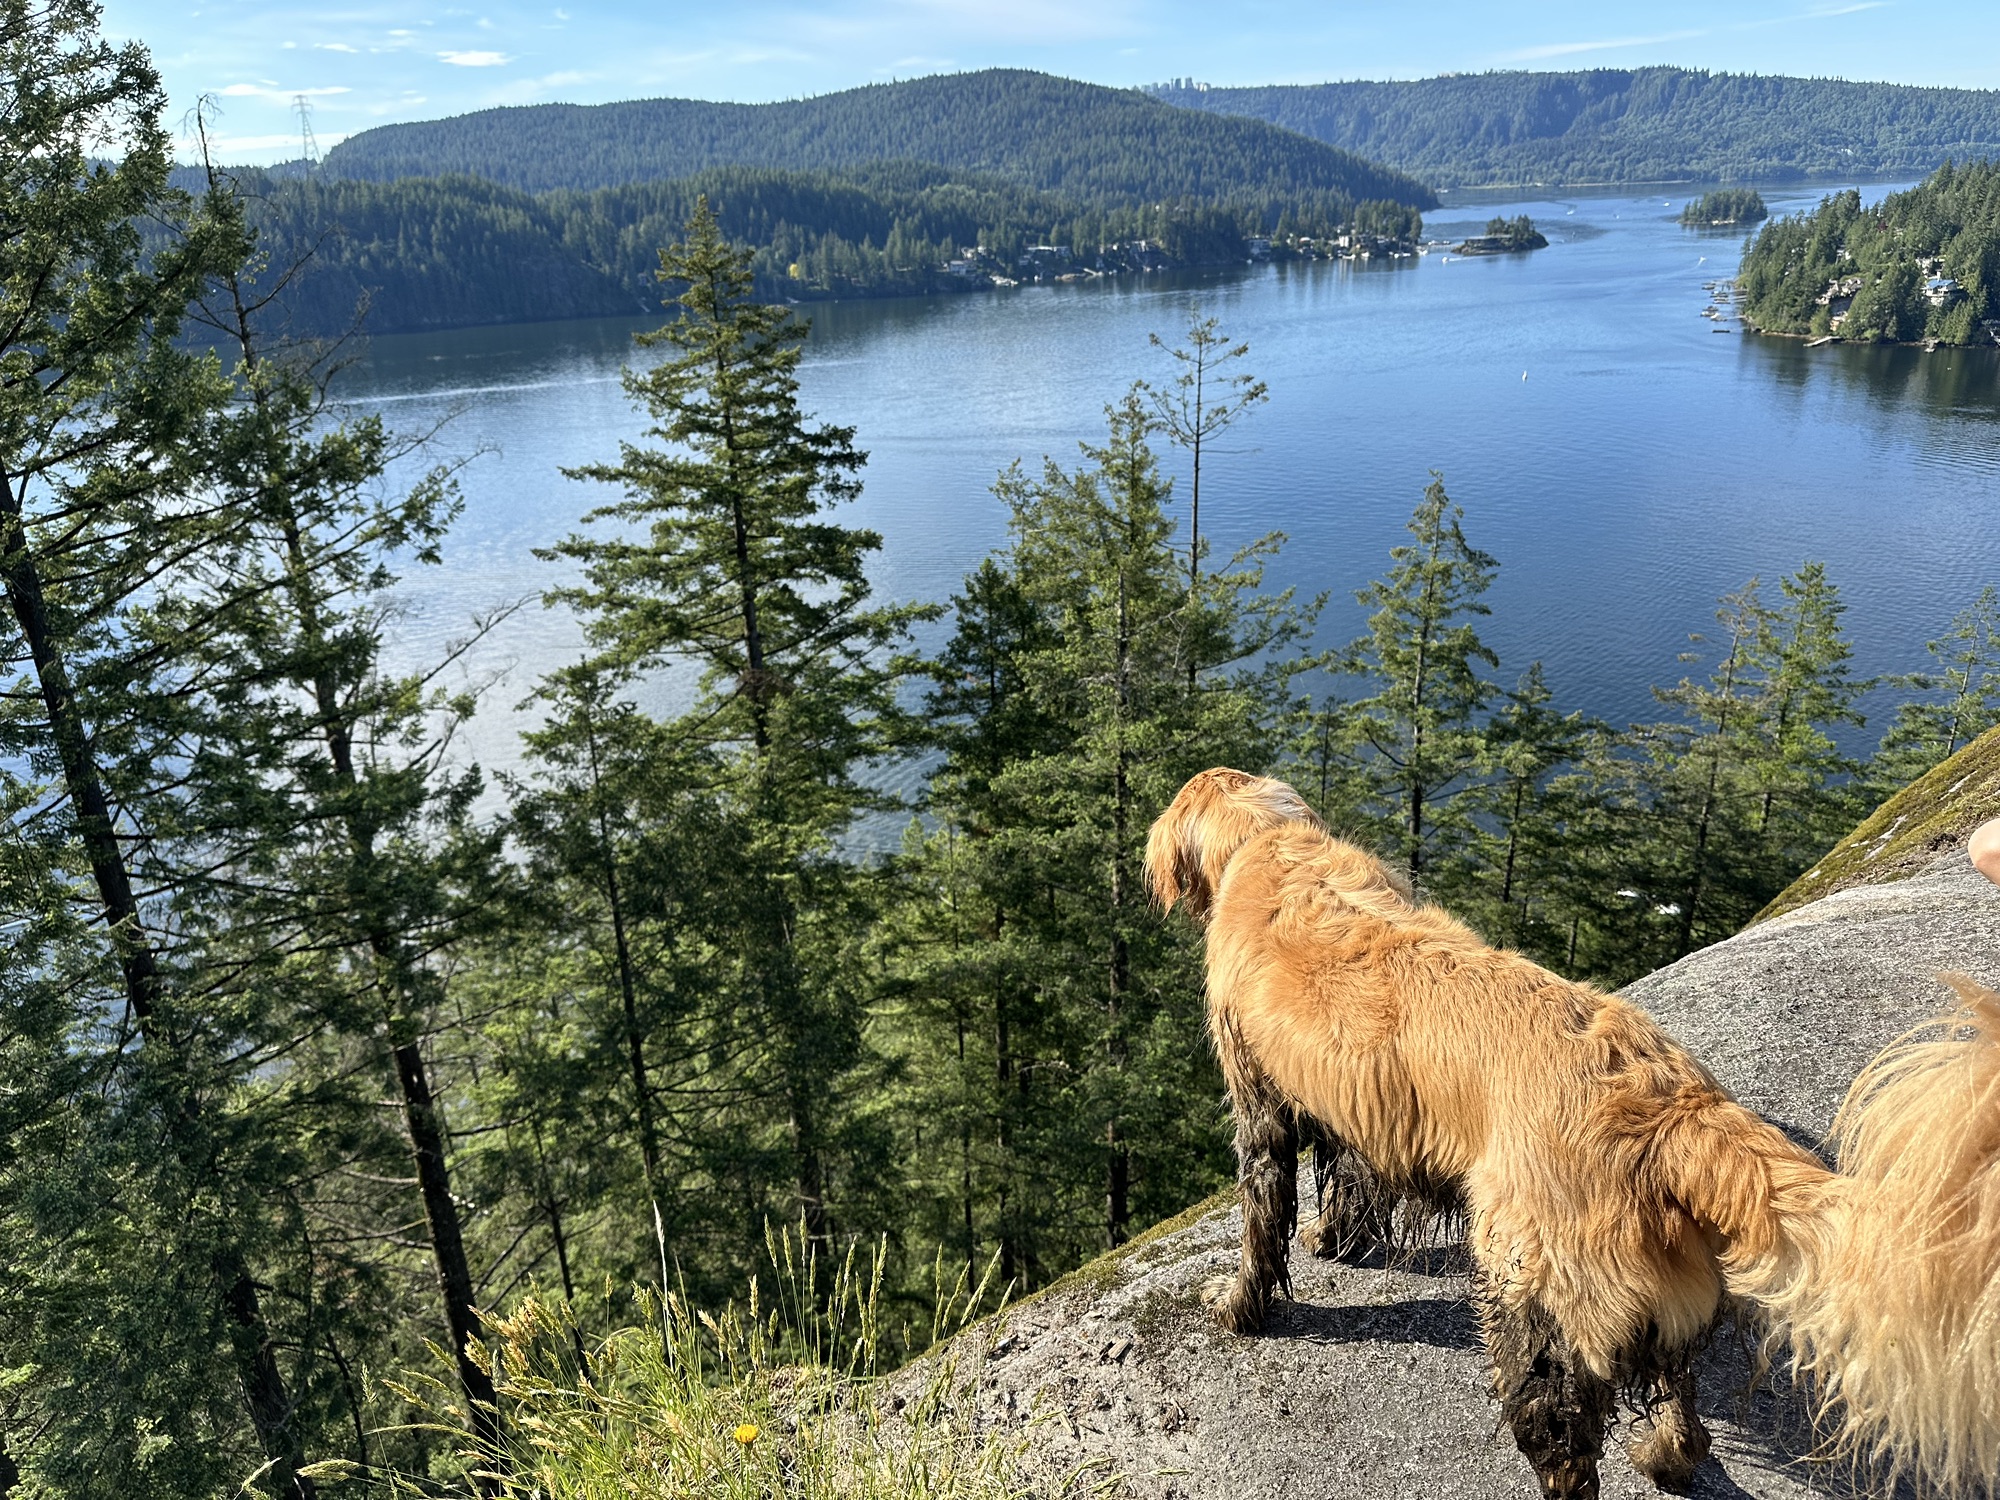 The good boy golden retriever isn’t scared of heights and surveys the landscape from atop Quarry Rock